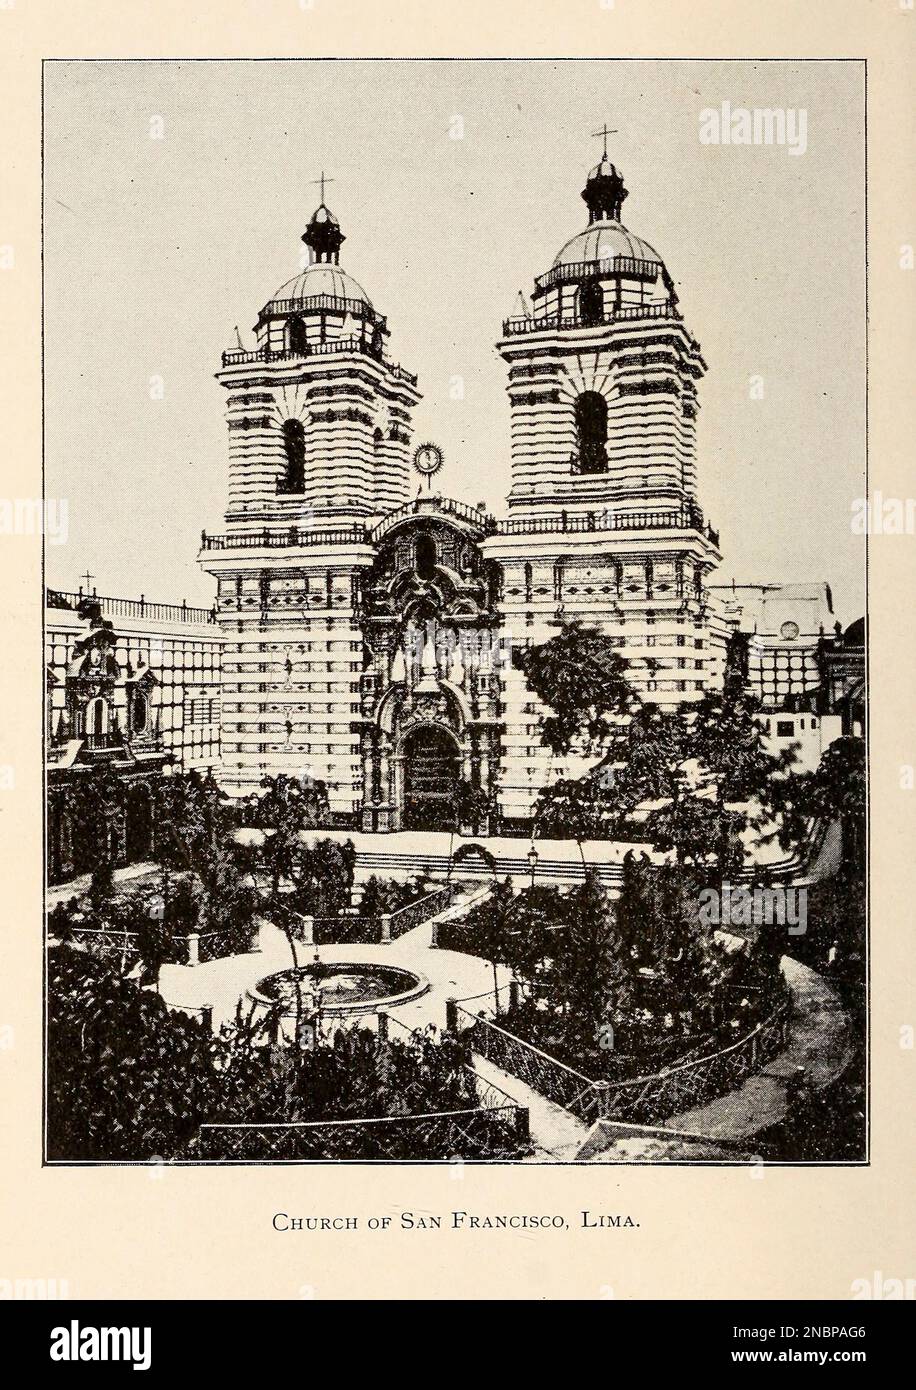 Church of San Francisco, Lima from the book ' A history of Peru by Sir Clements Robert Markham, Publisher Chicago : C. H. Sergel and Company Publication date 1892 Stock Photo